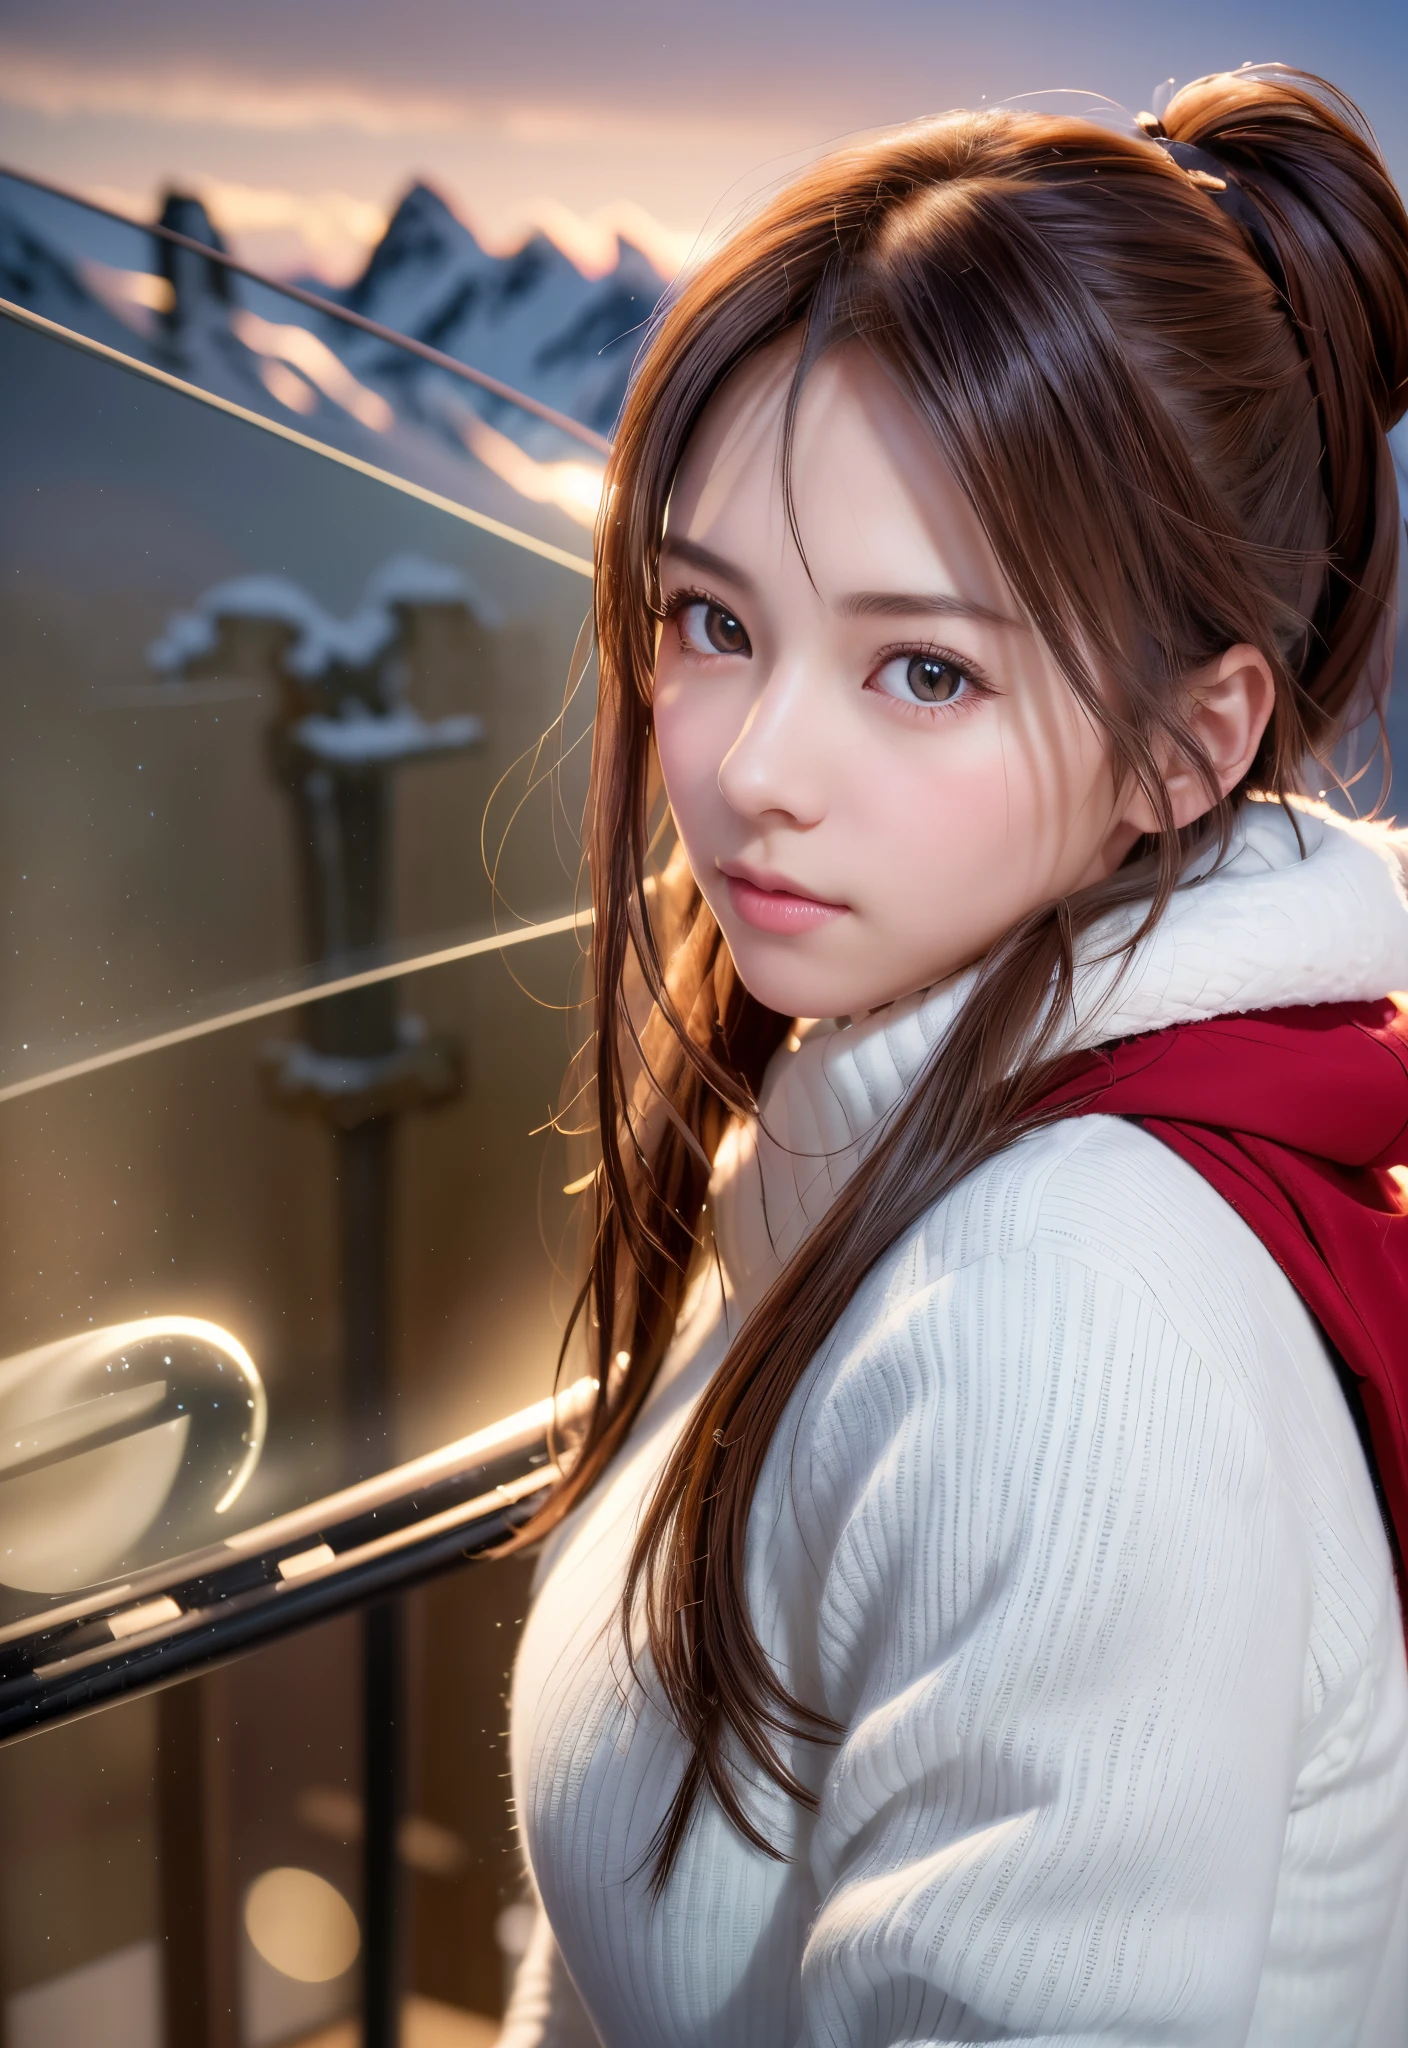 8K, of the highest quality, masutepiece:1.2), (Realistic, Photorealsitic:1.37), of the highest quality, masutepiece, Beautiful young woman, Pensive expression,、A charming、and an inviting look, skiing、snowboarder、Ski Wear, Hair tied back, Cinematic background, Light skin tone、Ski Resort Background